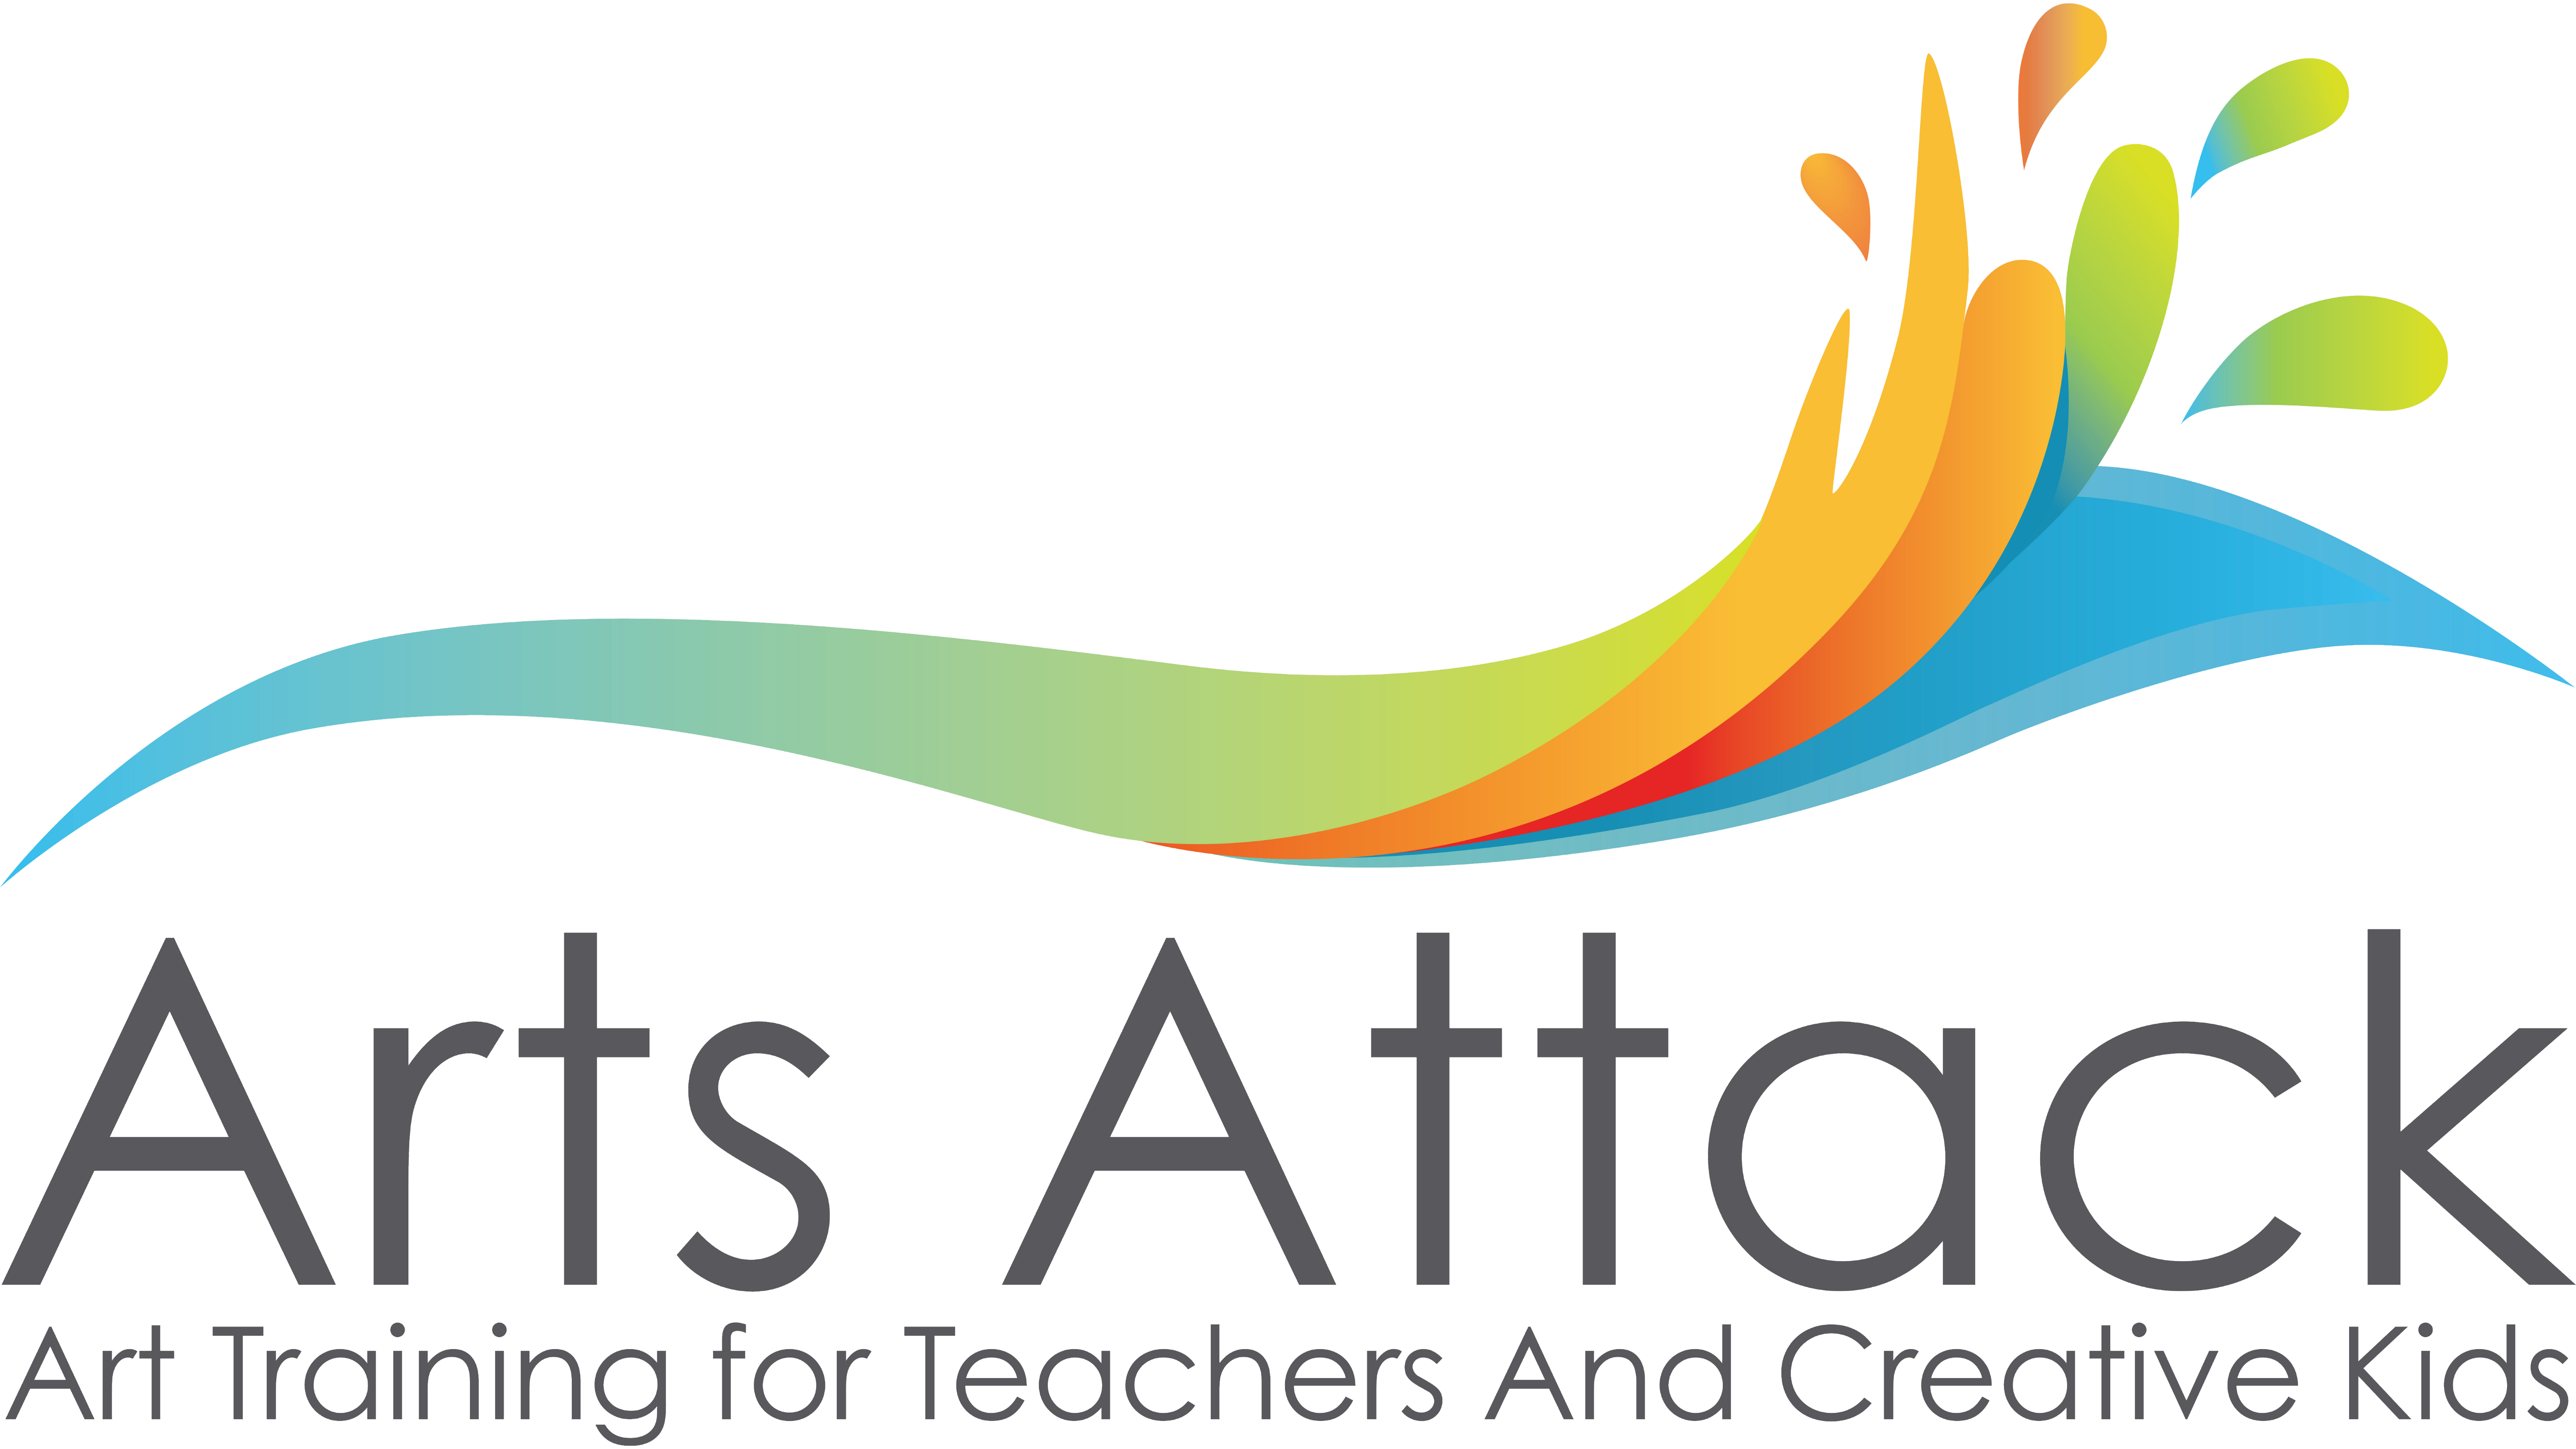 Elementary Art Curriculum lesson plans for schools